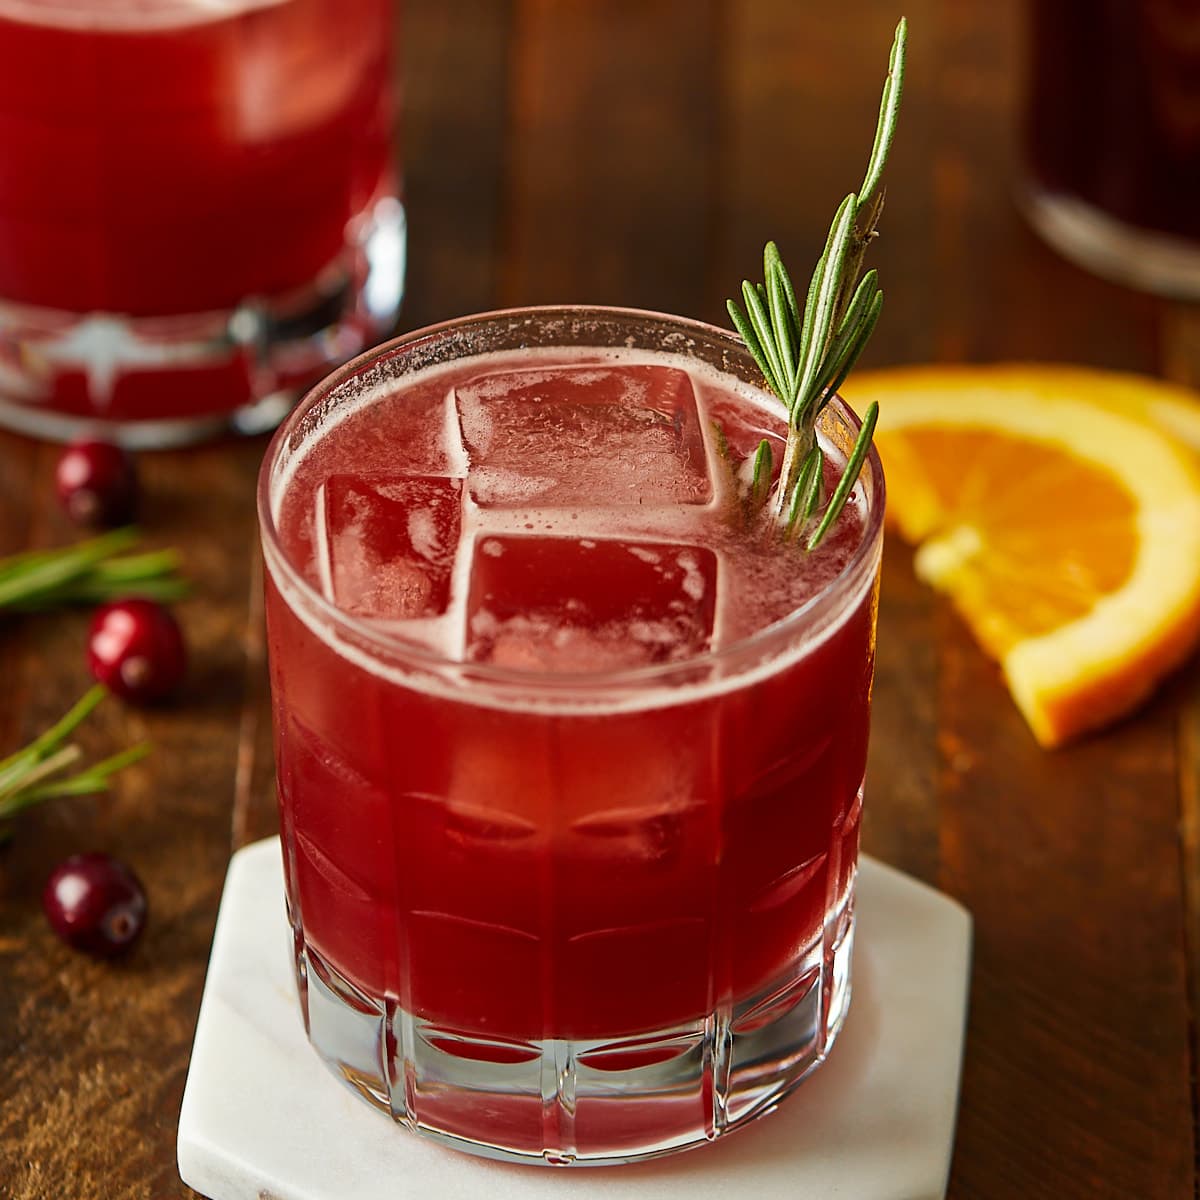 cranberry orange whiskey sour in a glass garnished with a sprig of rosemary.